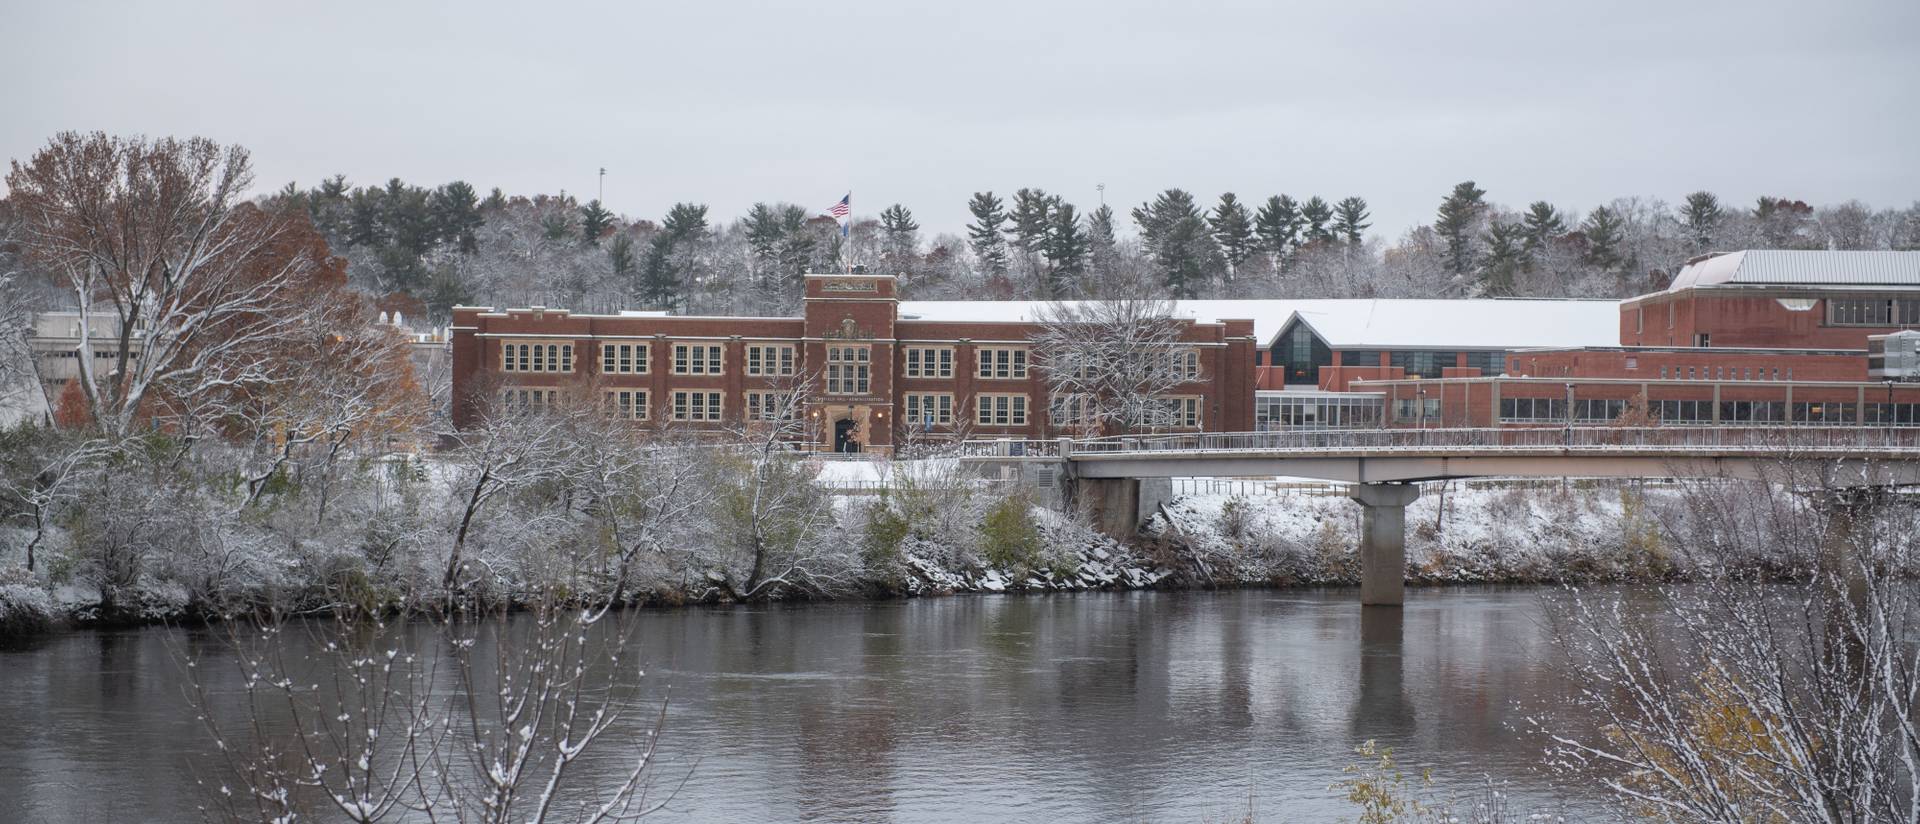 Lower campus on snowy day